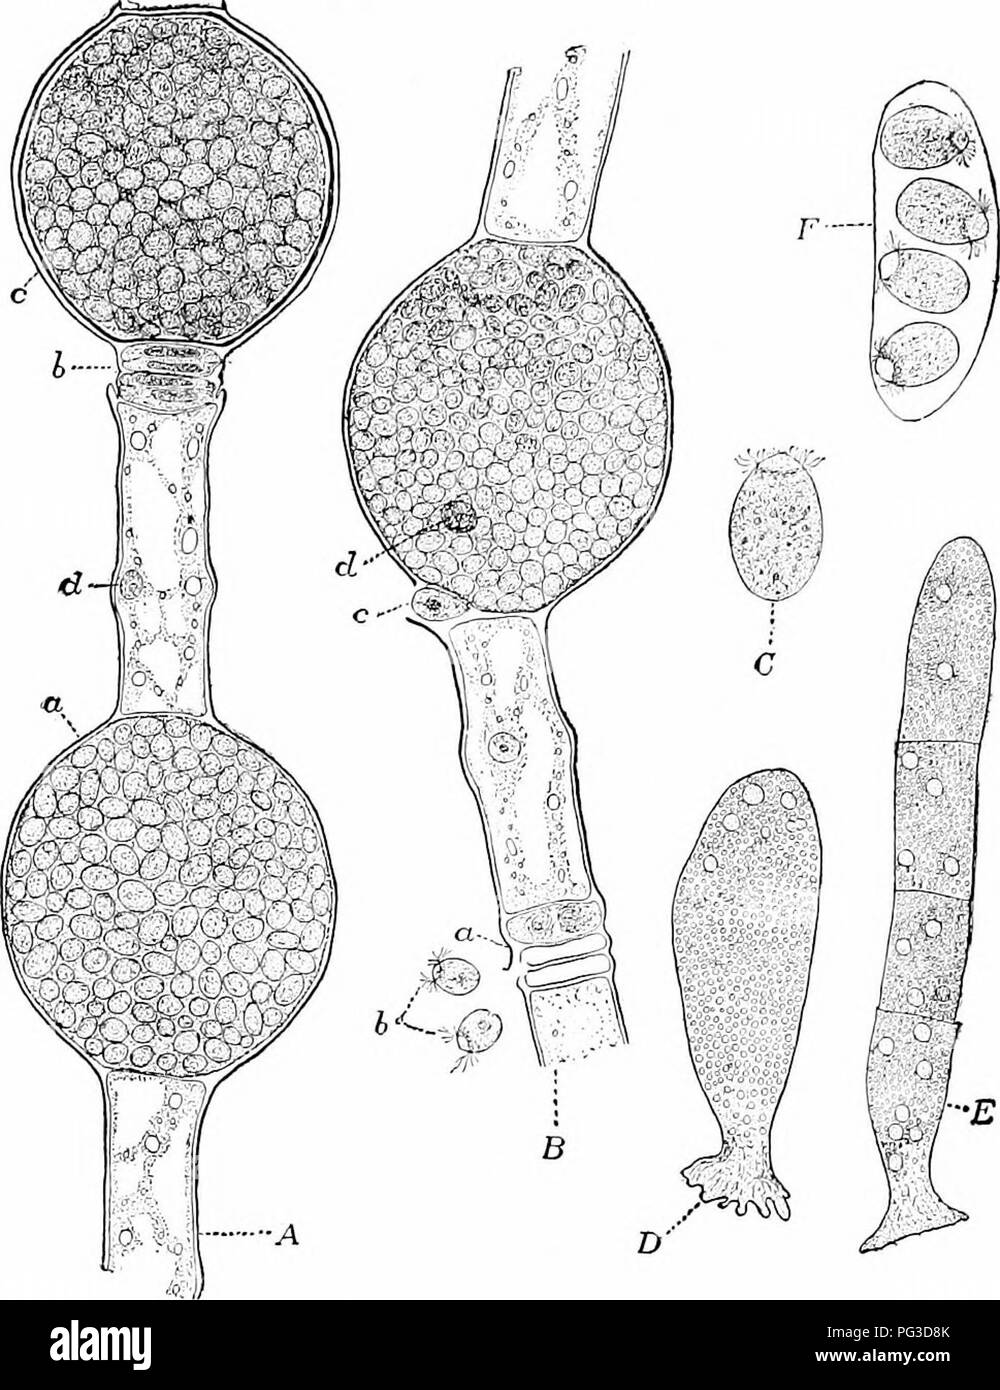 . Plant studies; an elementary botany. Botany. . 2flG. Edogoniuni nodosum, a Conferva form ; .4, portion of a filament, showing a ve.E^etative celi with its nnclens id), an oogoninni ia) filled by an e^g packed with, food material, a second oogoninm (r) containing a fertilized etrg or oospore as shown by the heavy waW. and two antheridia ib). each containing two spei-ms; B, another filament shoing antheridia («i from which two sperms [b) have escaped, a vegetative ceil wilh its nnclens, and an oogonium which a sperm (c) has entered and is coming in contact with the egg whose nnclens (d) may  Stock Photo